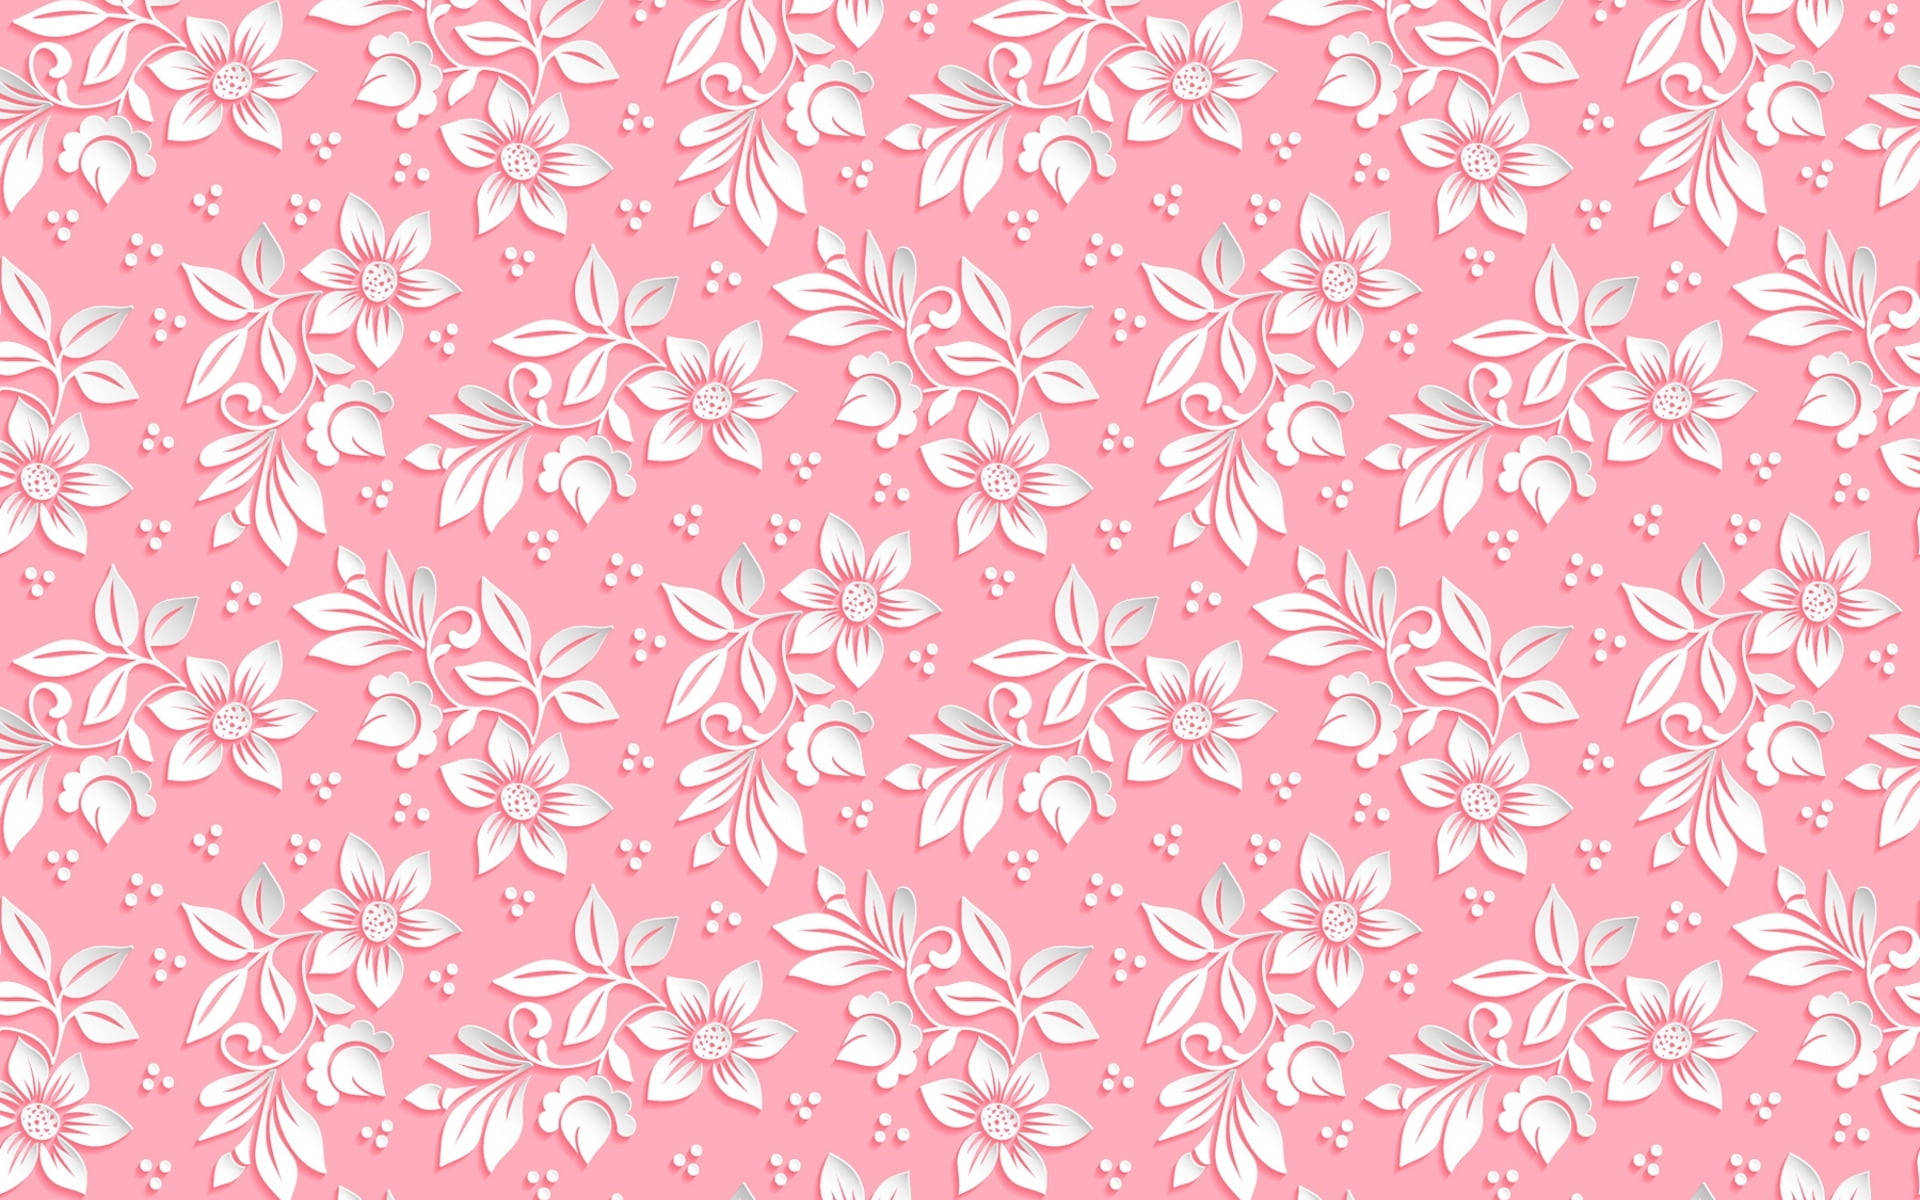 Girly White And Pink Florals Background